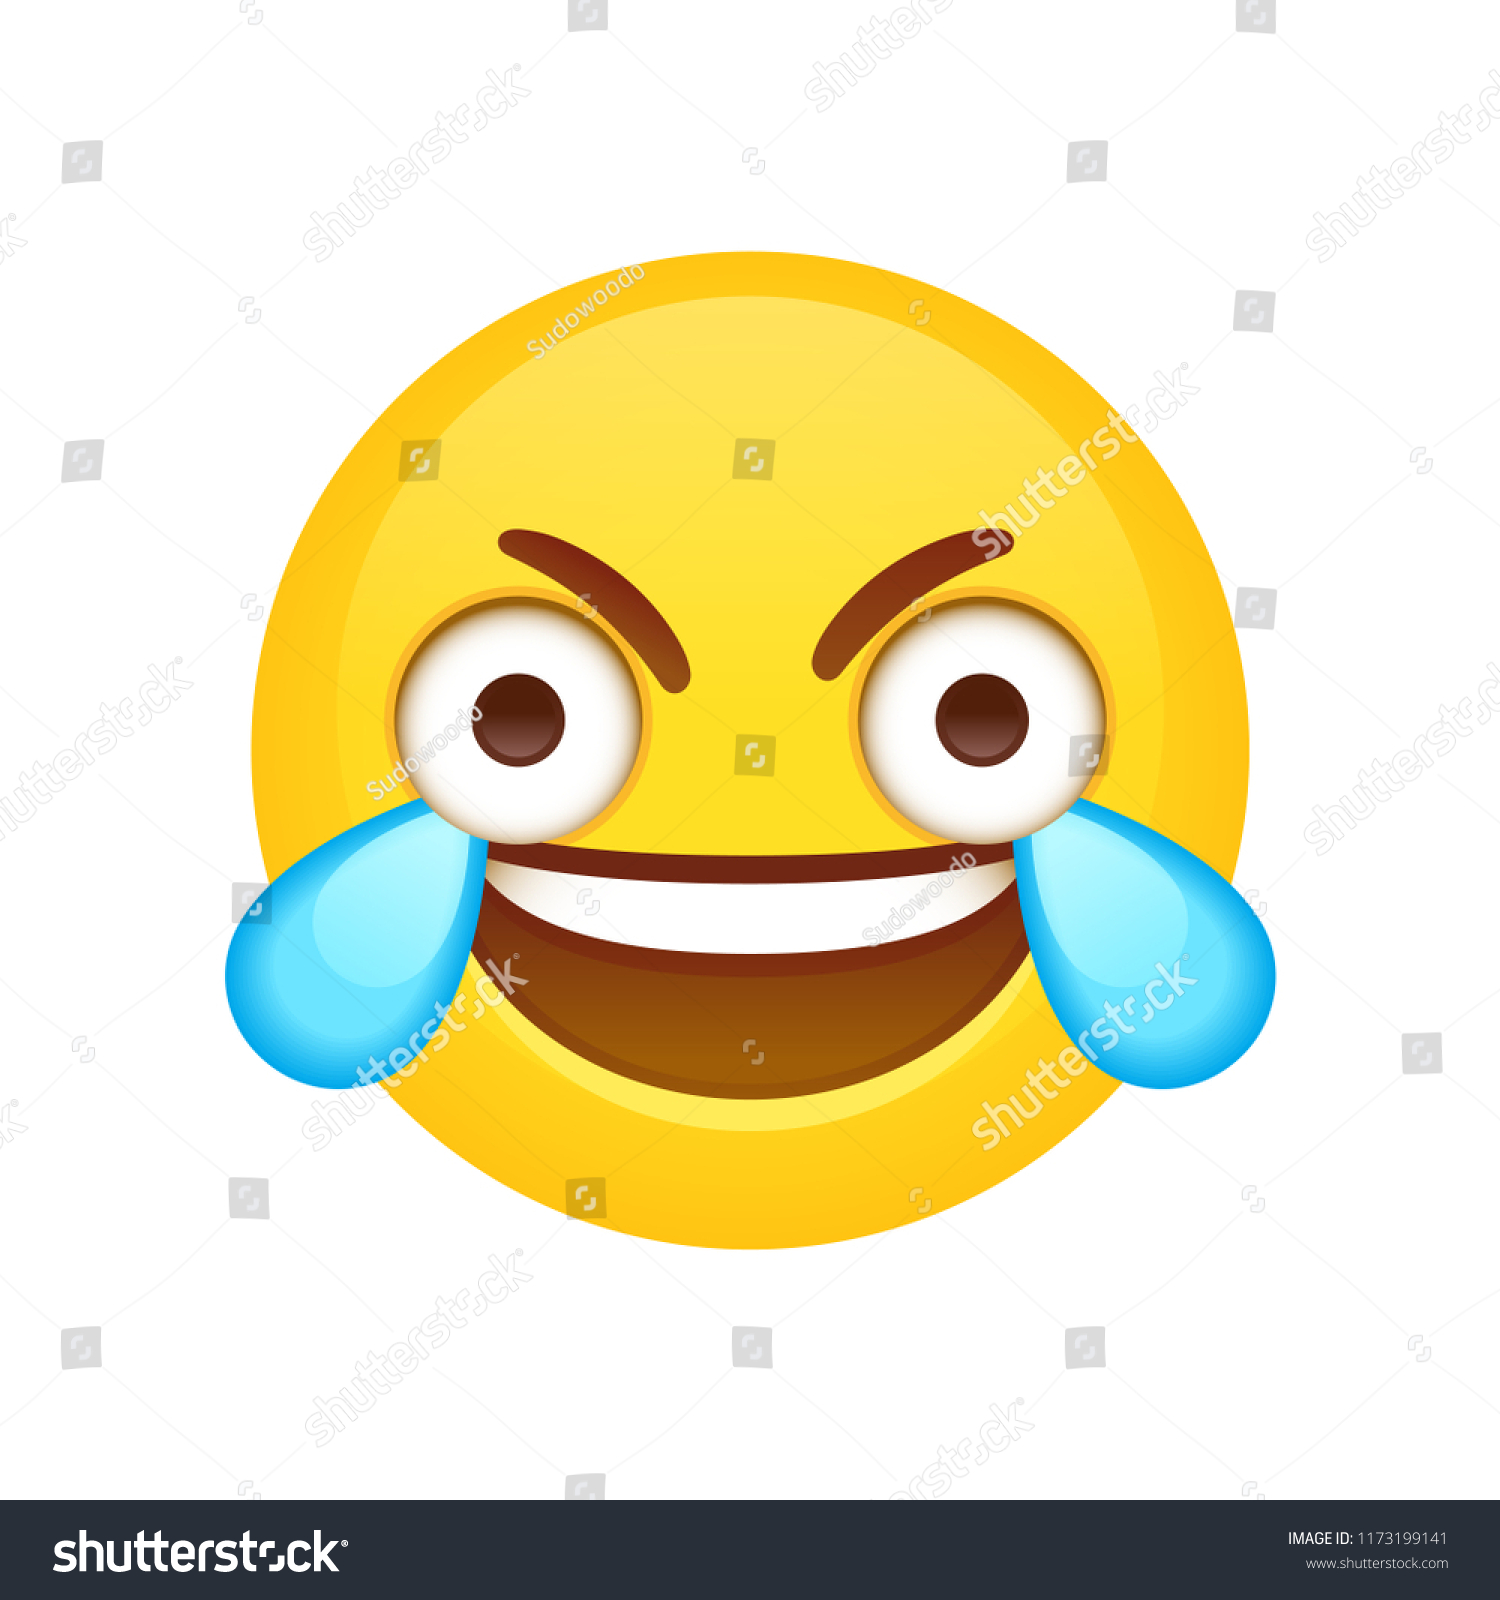 Open Eye Crying Laughing Emoji Funny Stock Vector (Royalty Free) 1173199141